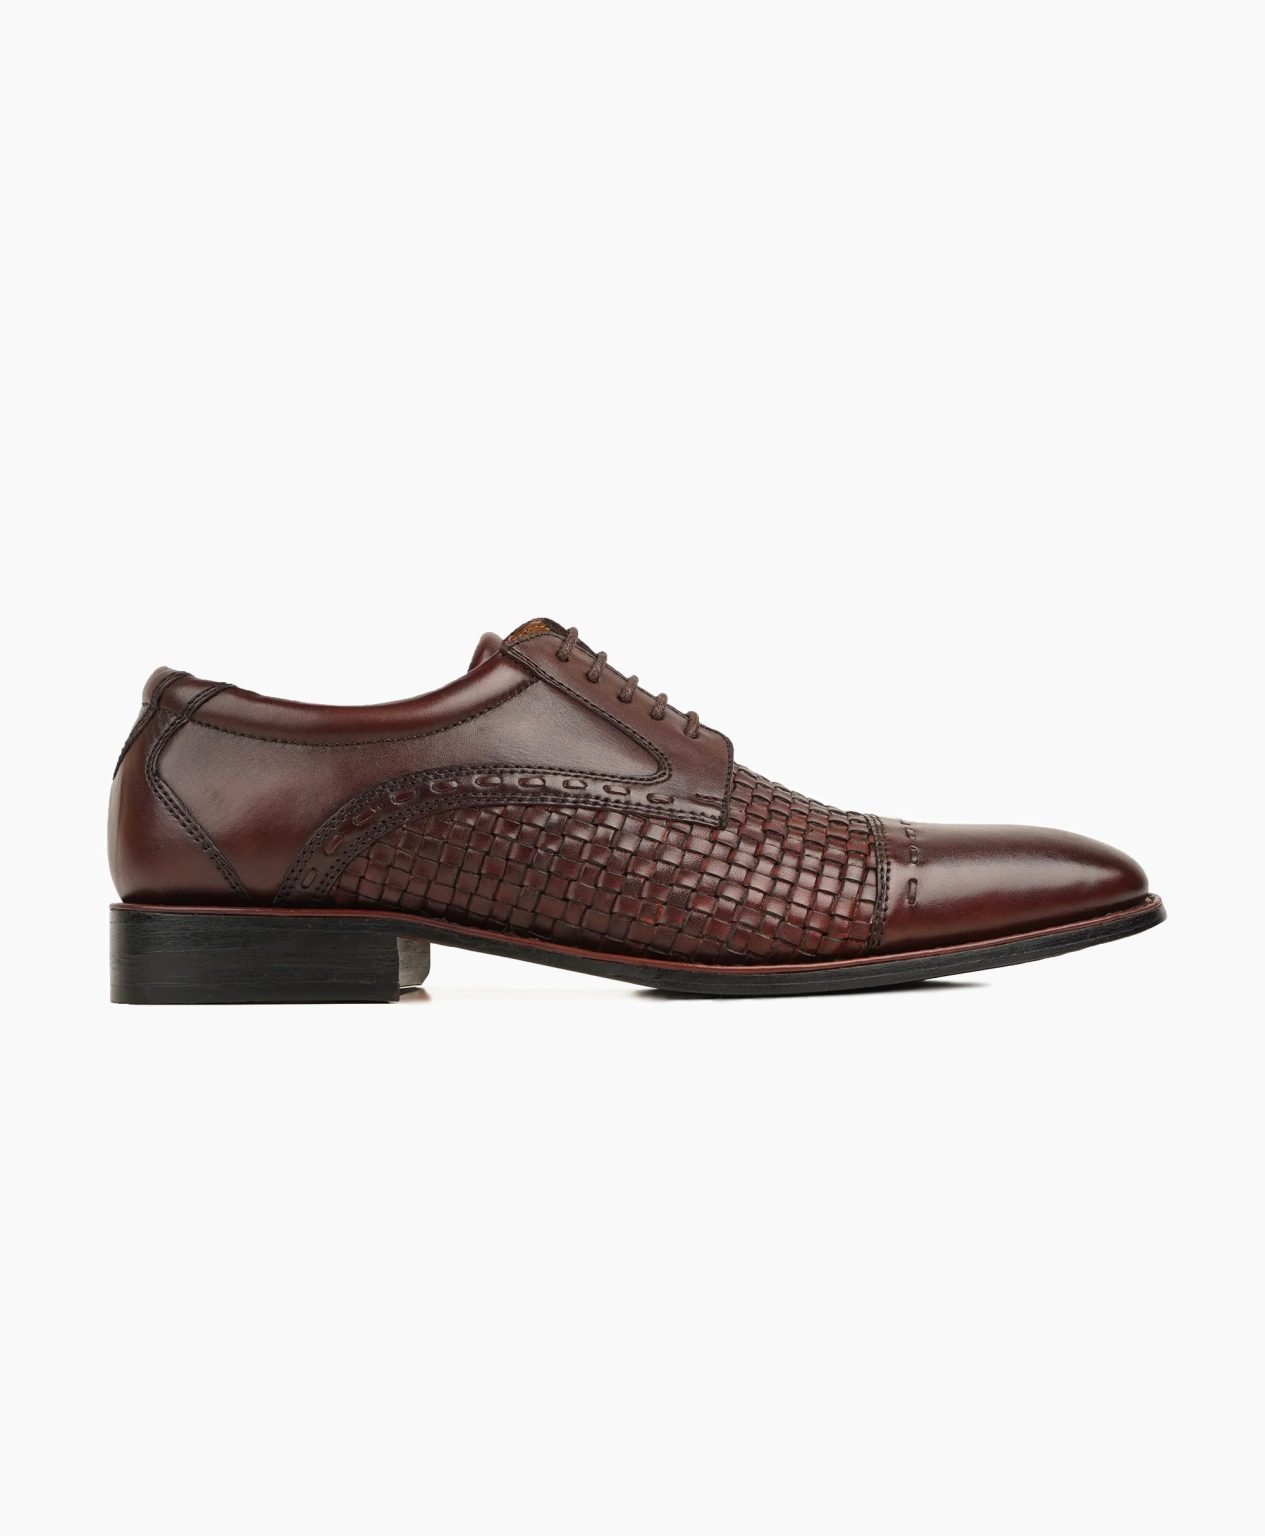 ashbourne-derby-brown-woven-leather-shoes-image201